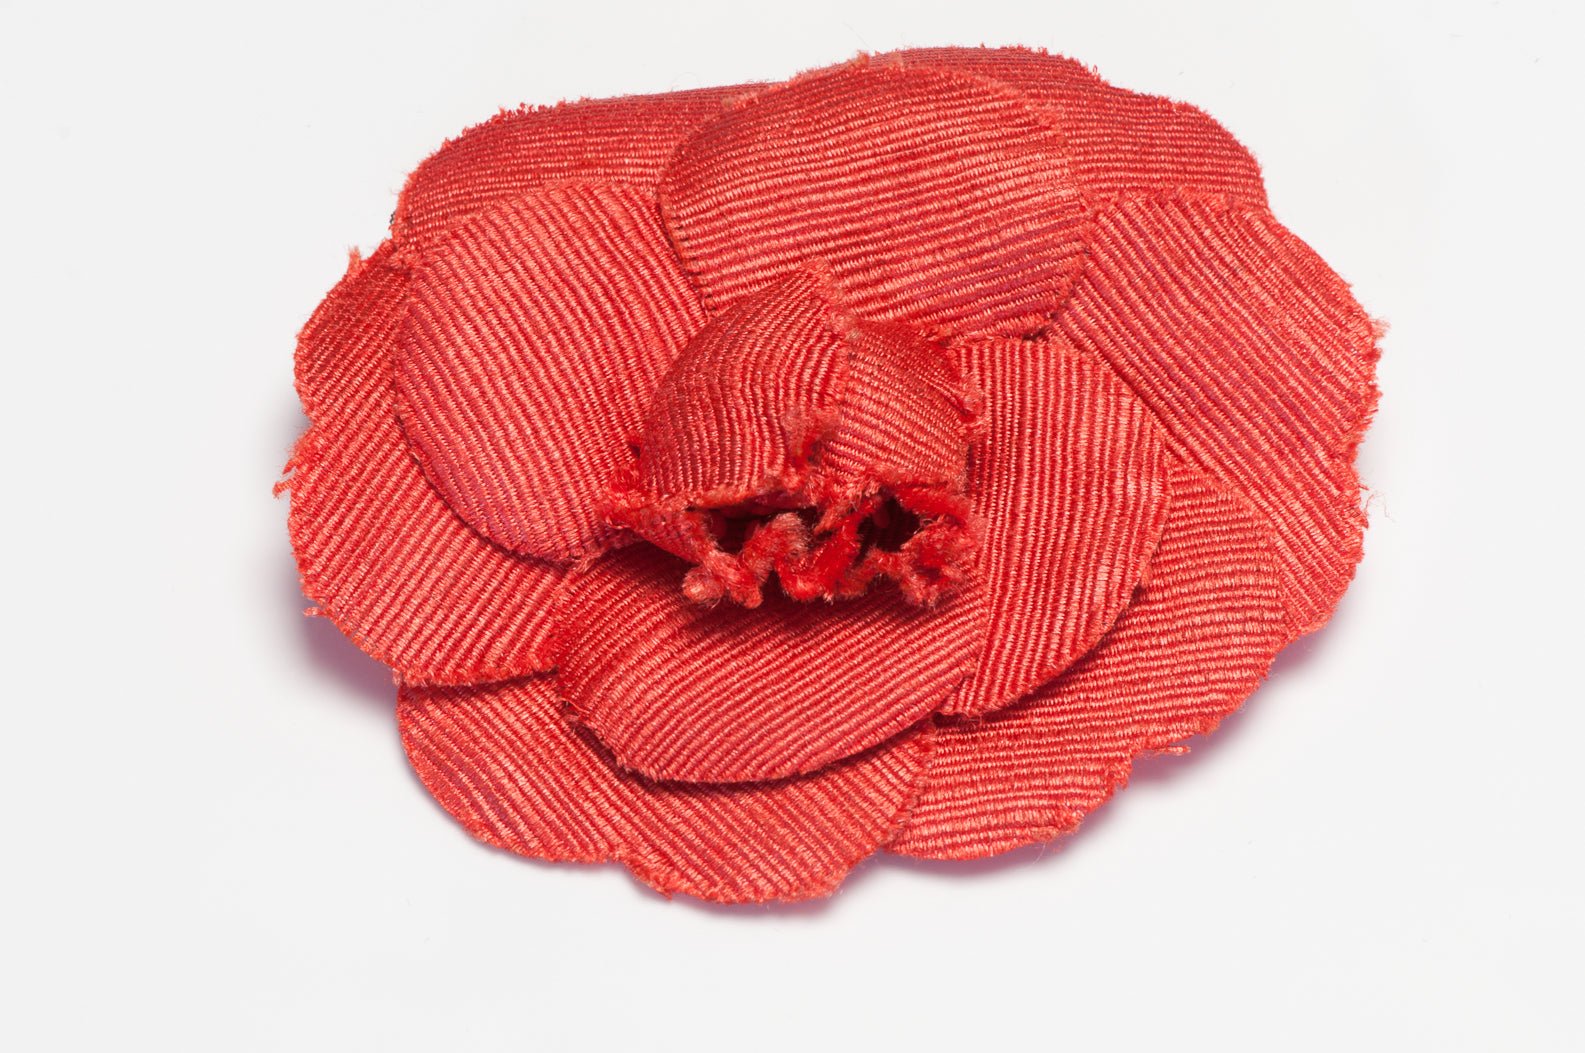 Vintage 1990’s Chanel Paris Red Fabric Camellia Flower Brooch